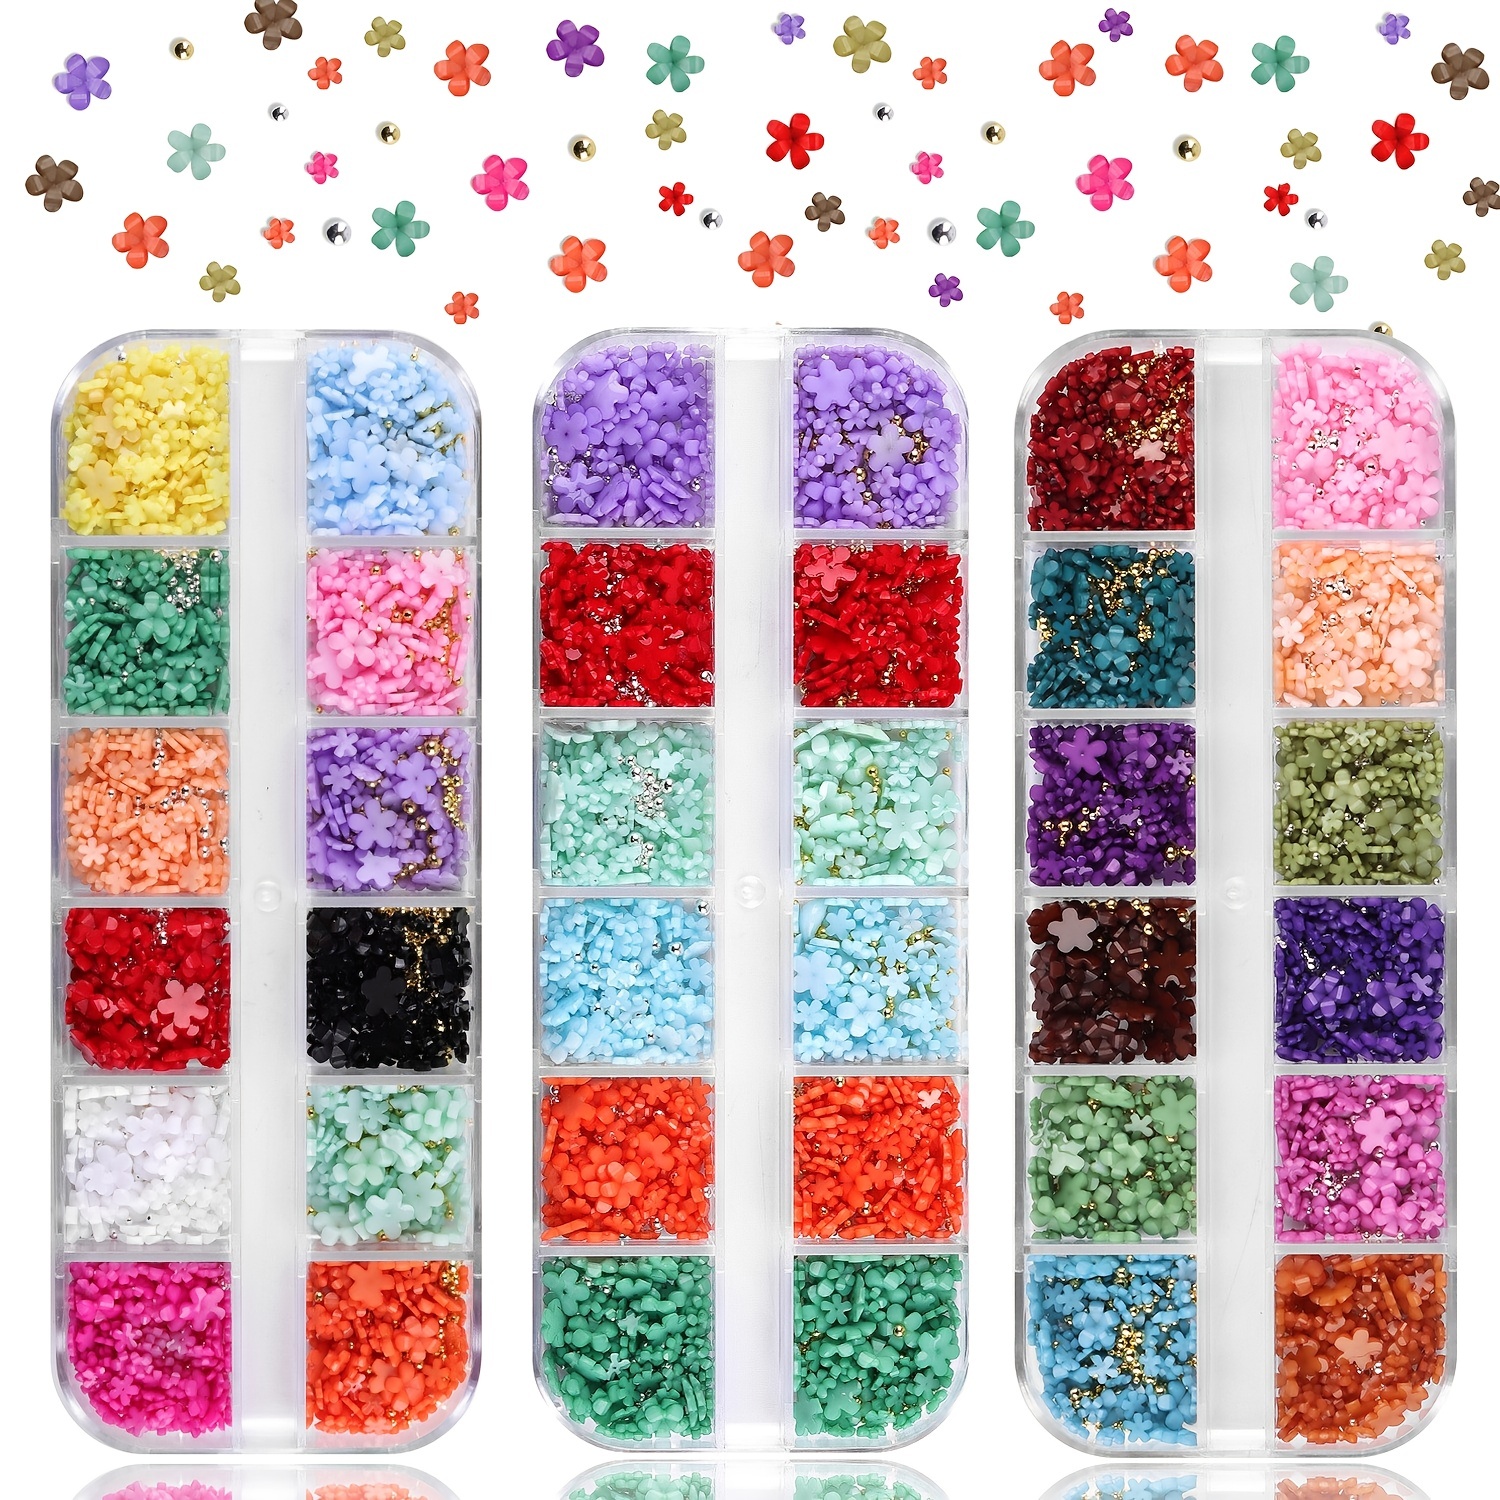 Flowers Nail Art Decorations, White Blossom Beads Pearl Nail Sequins Design  Set, Floral Studs Rhinestone Gems for Nail Stickers Decals Foils, Women